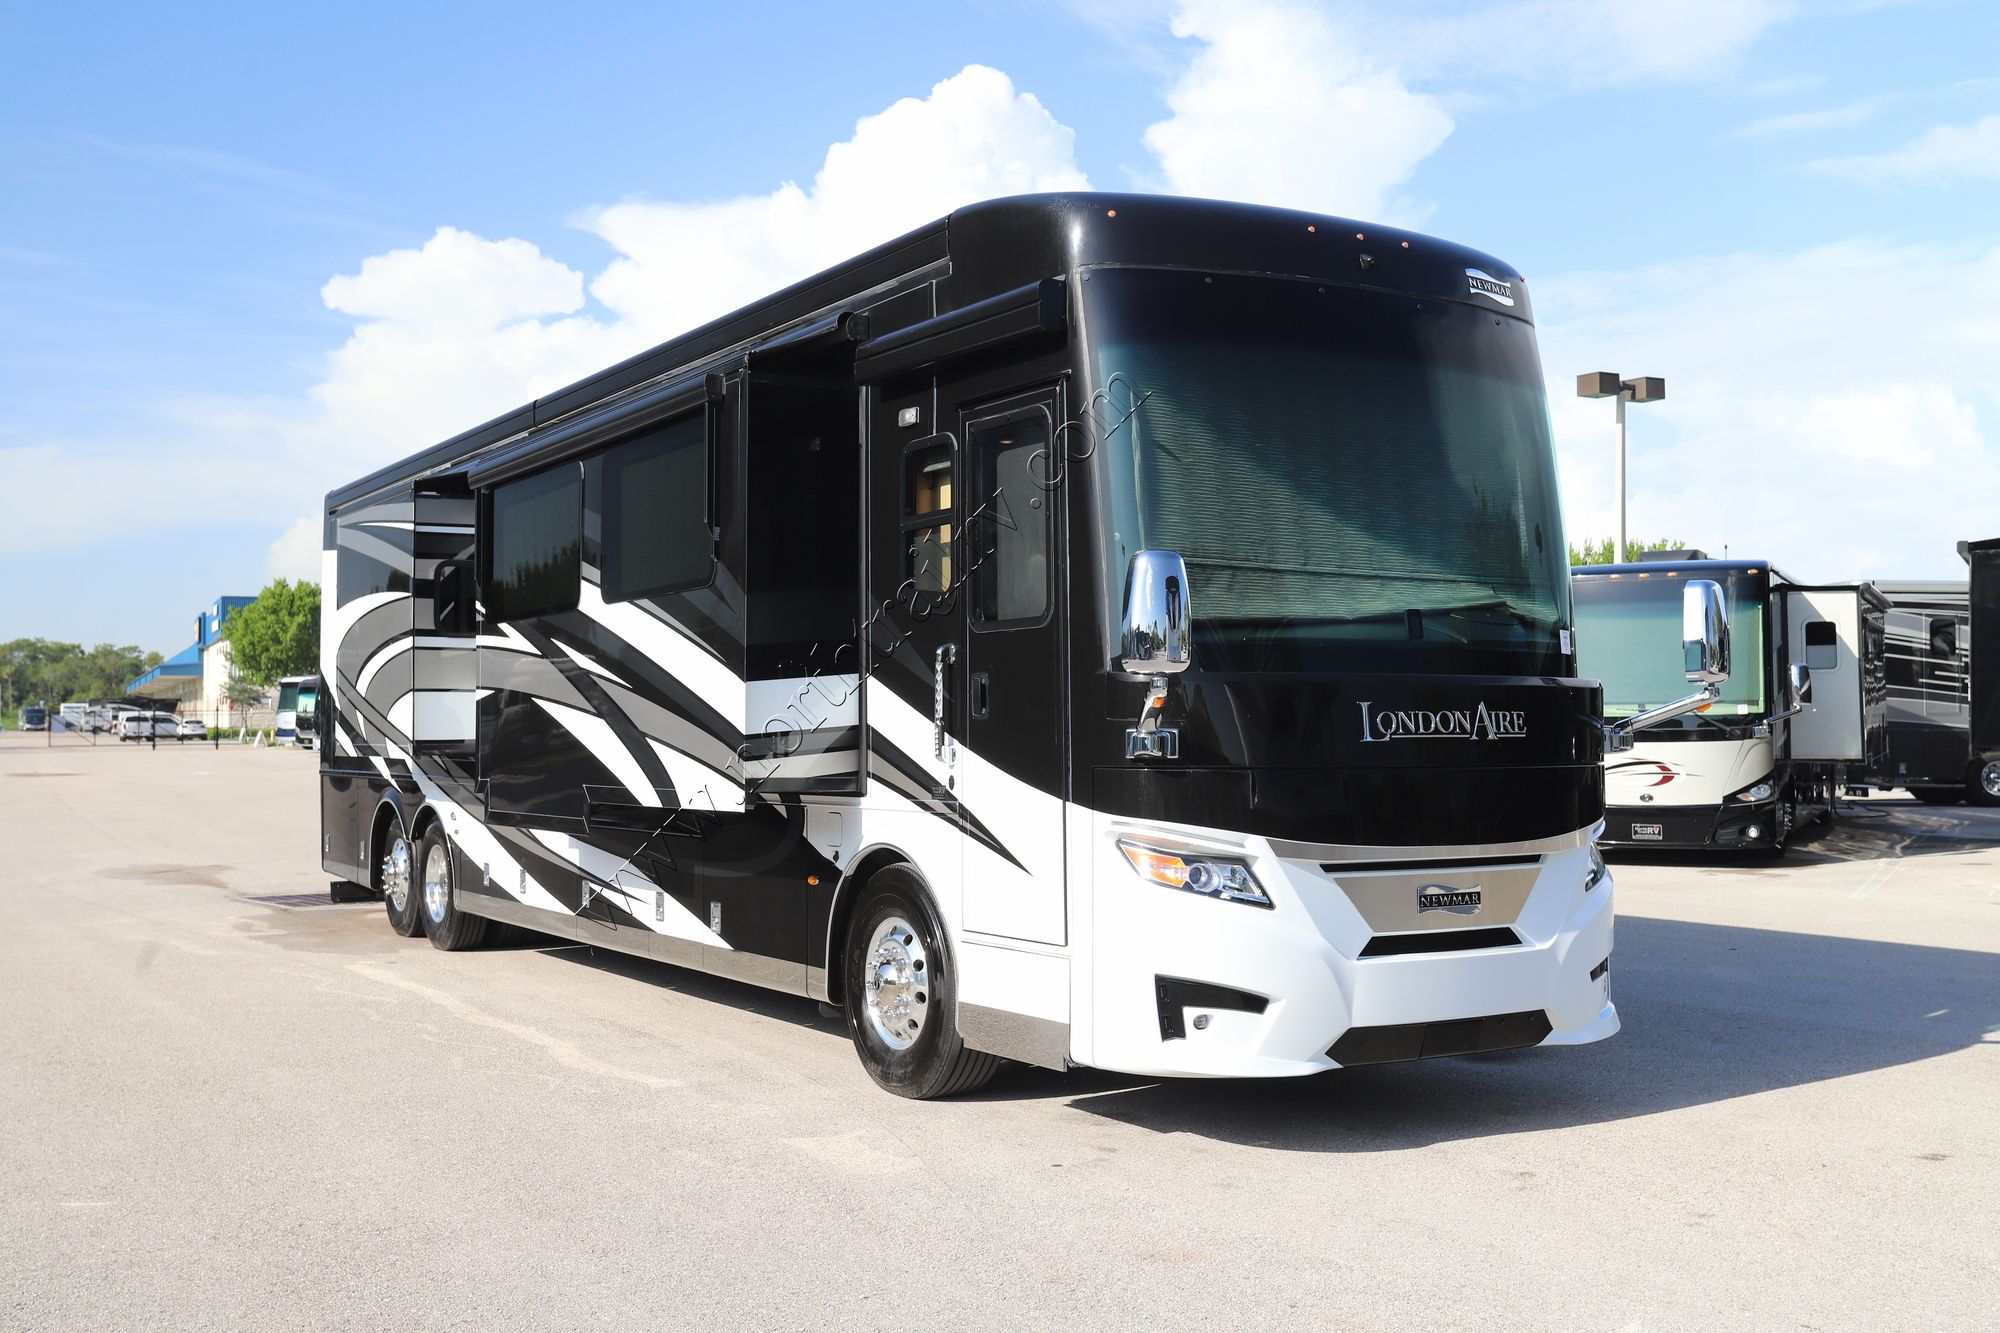 Used 2021 Newmar London Aire 4533 Class A  For Sale